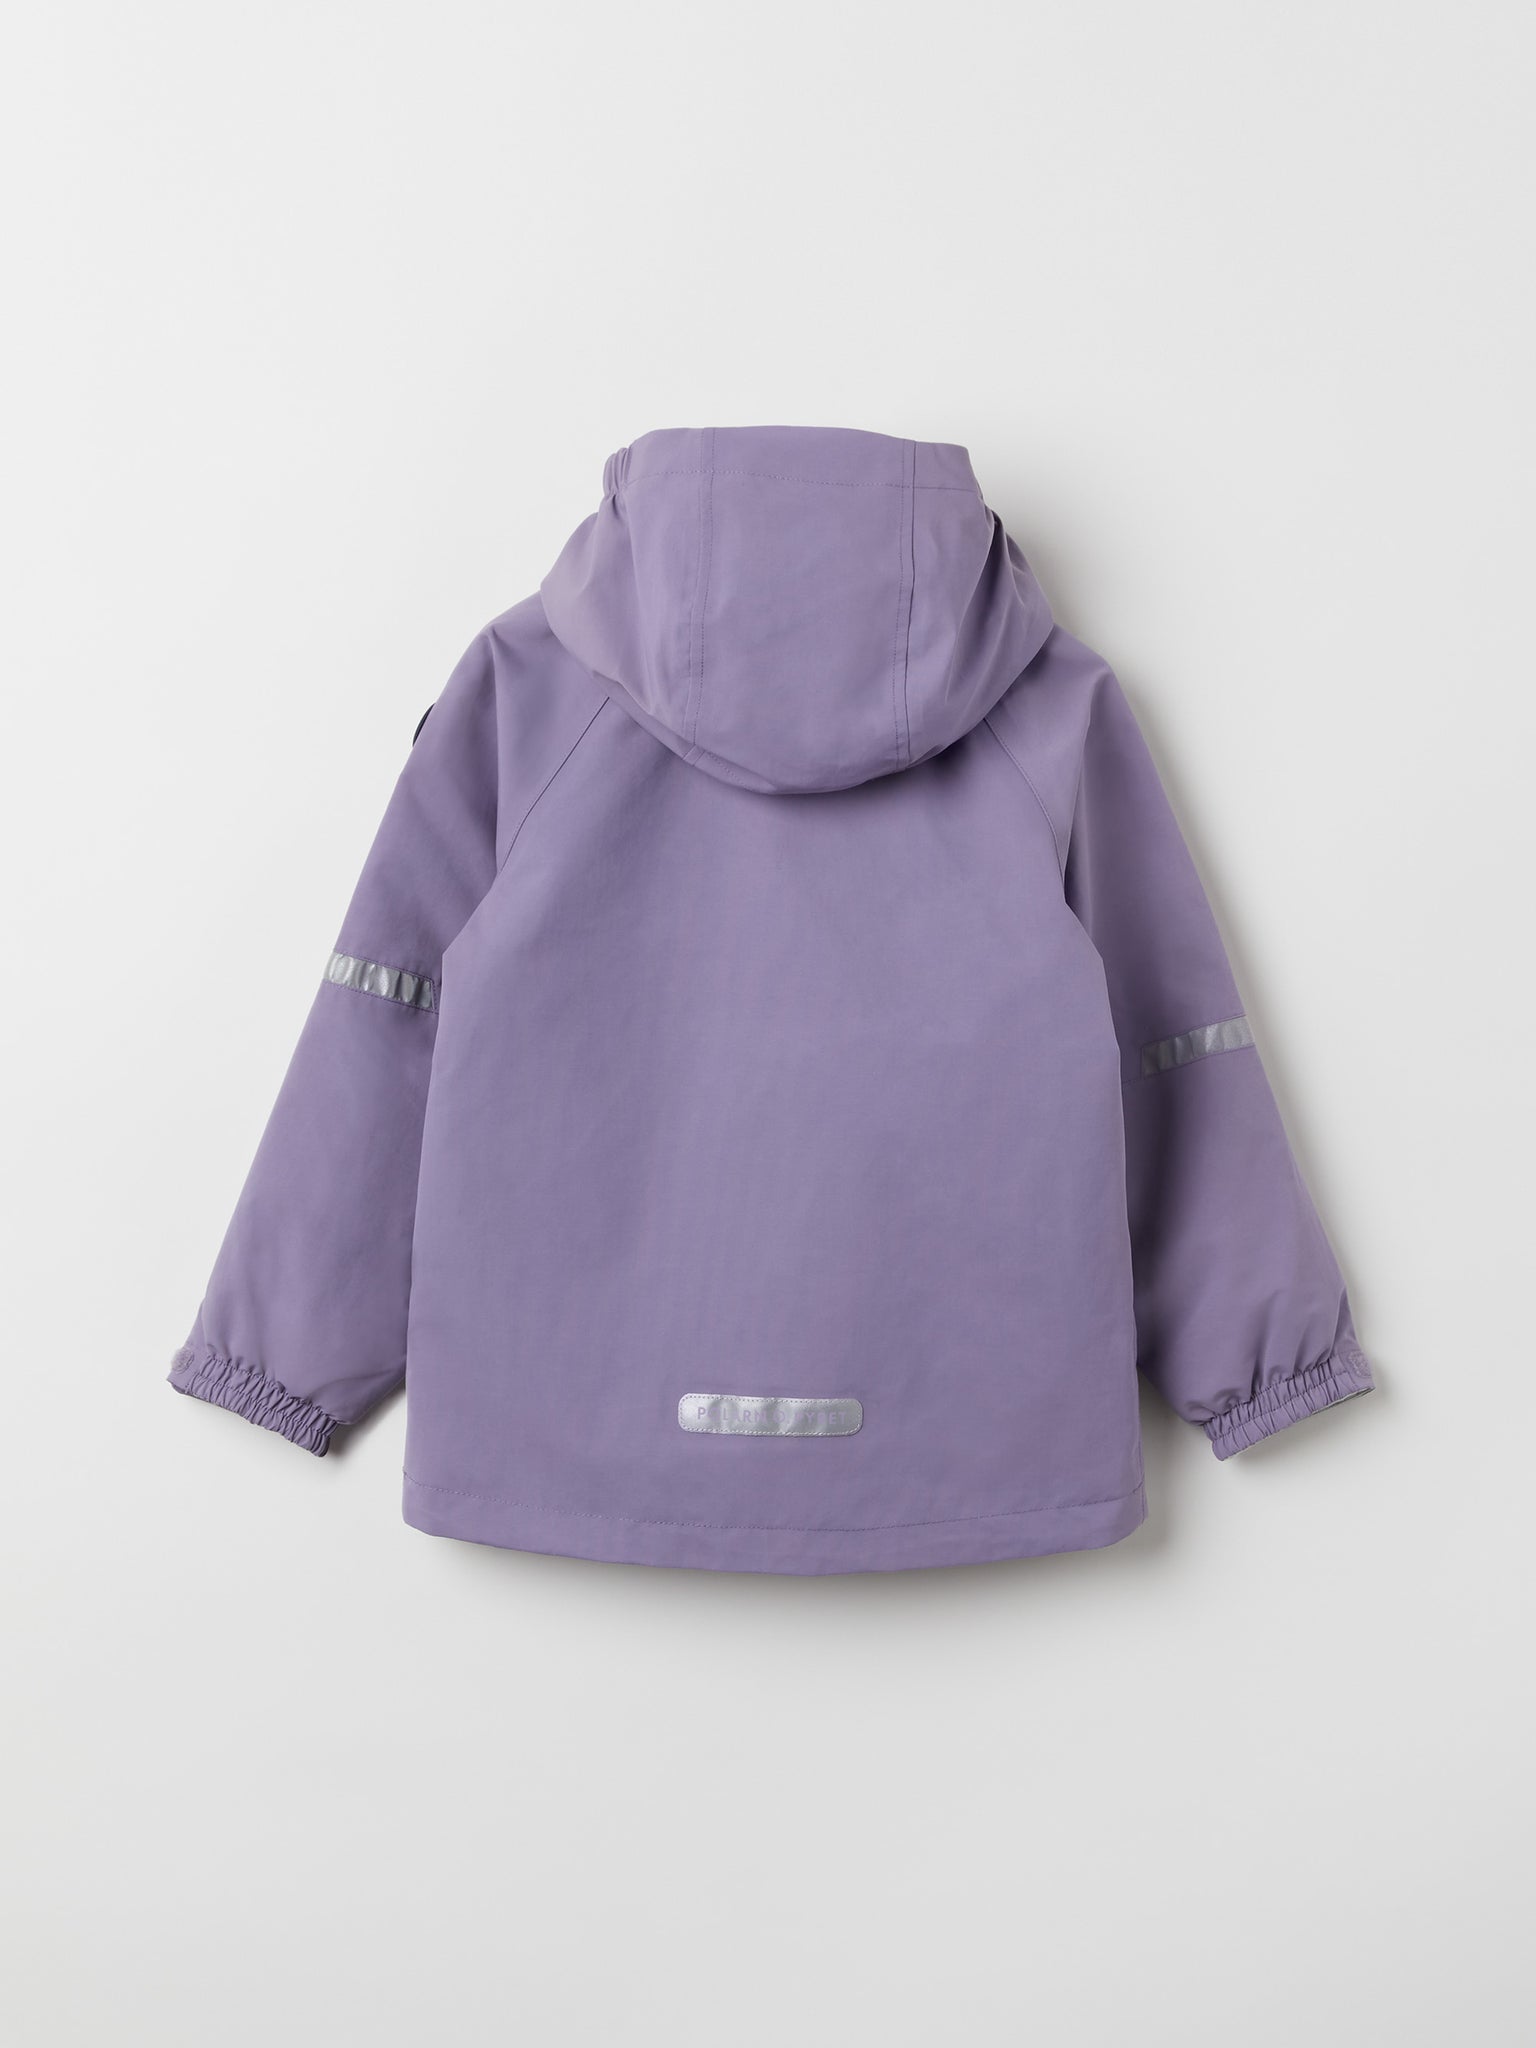 Kids Purple Waterproof Shell Jacket from the Polarn O. Pyret outerwear collection. Kids outerwear made from sustainably source materials